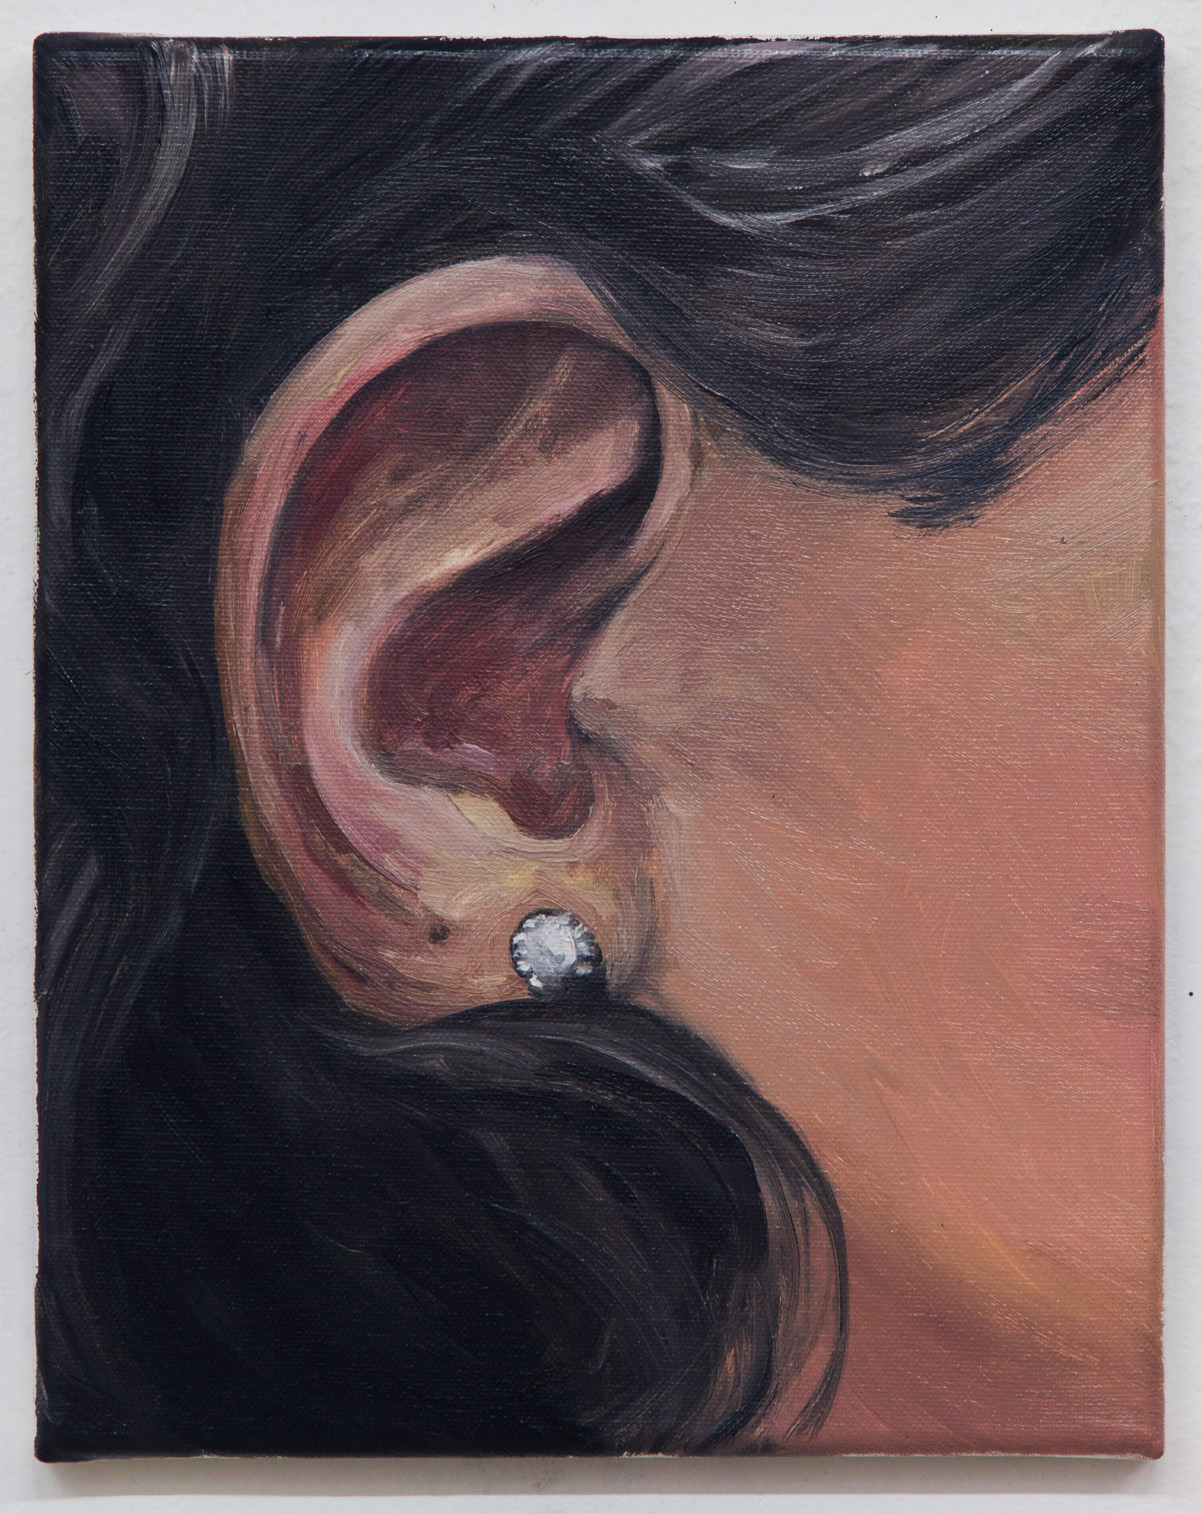 From the "Ear Collection"; 24 x 30 cm; oil on canvas; 2018